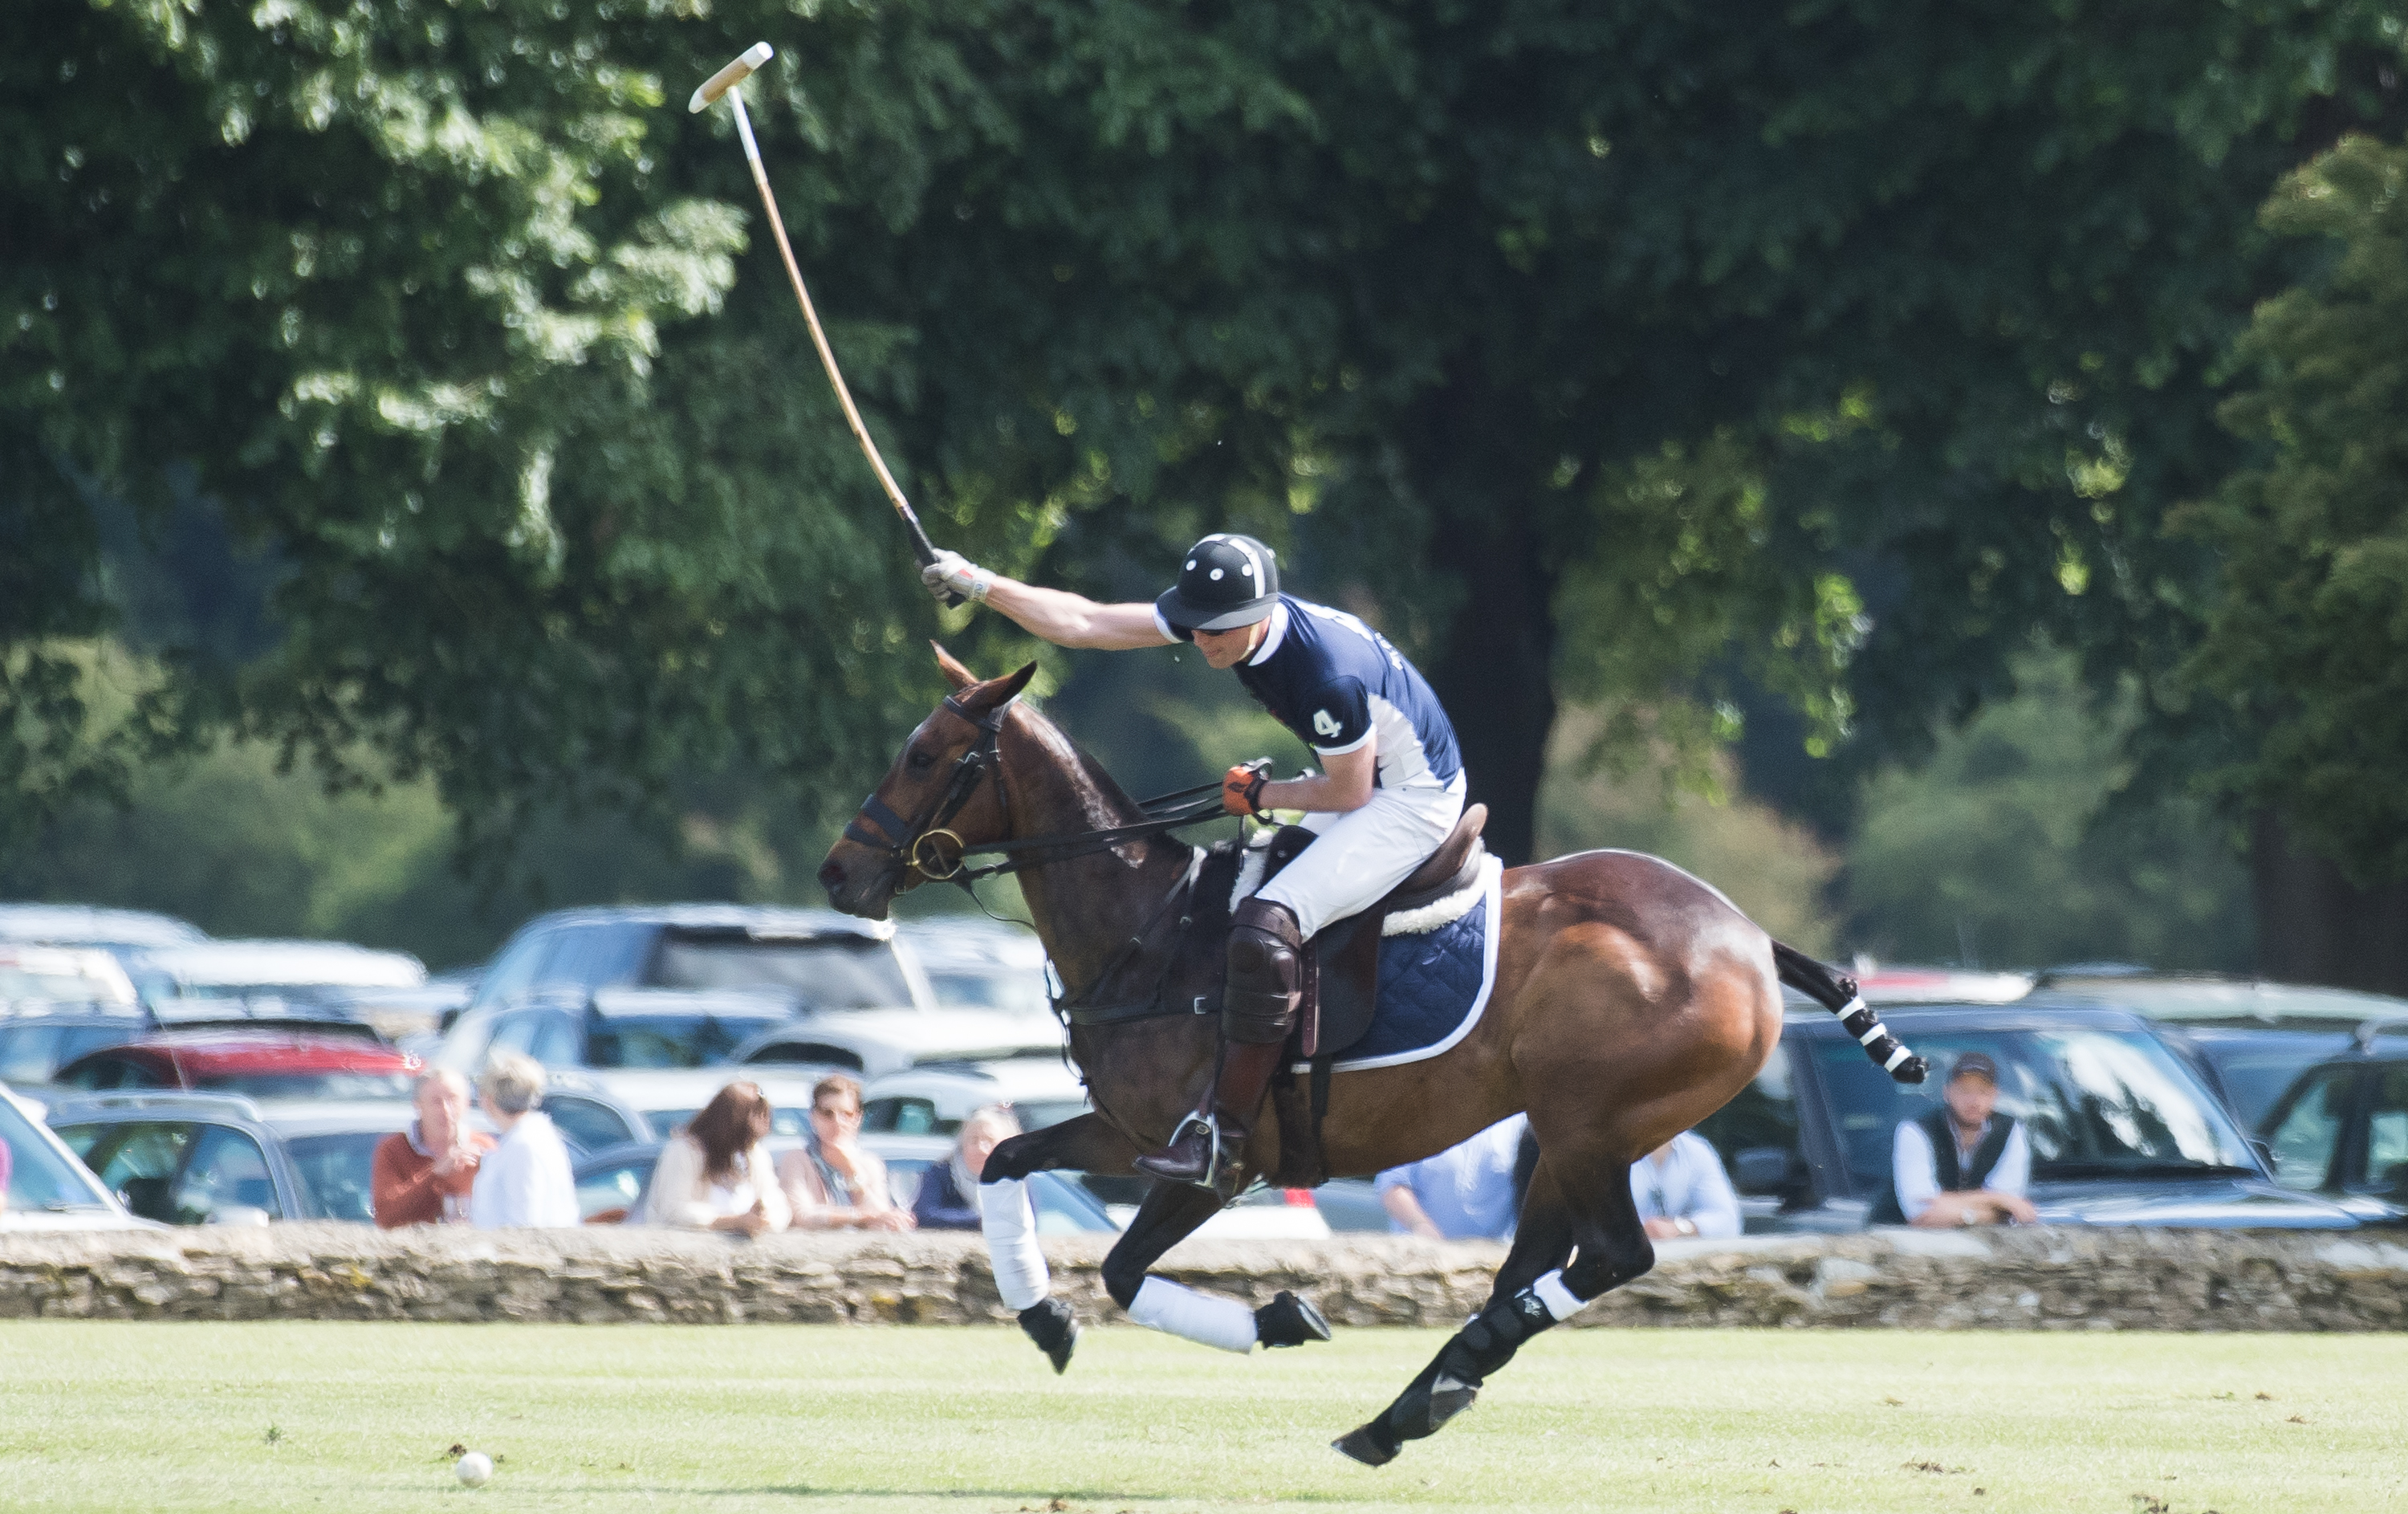 Prince William, Duke of Cambridge plays in the Maserati Royal Charity Polo Trophy at Beaufort Polo Club on June 11, 2017 in Tetbury, England.